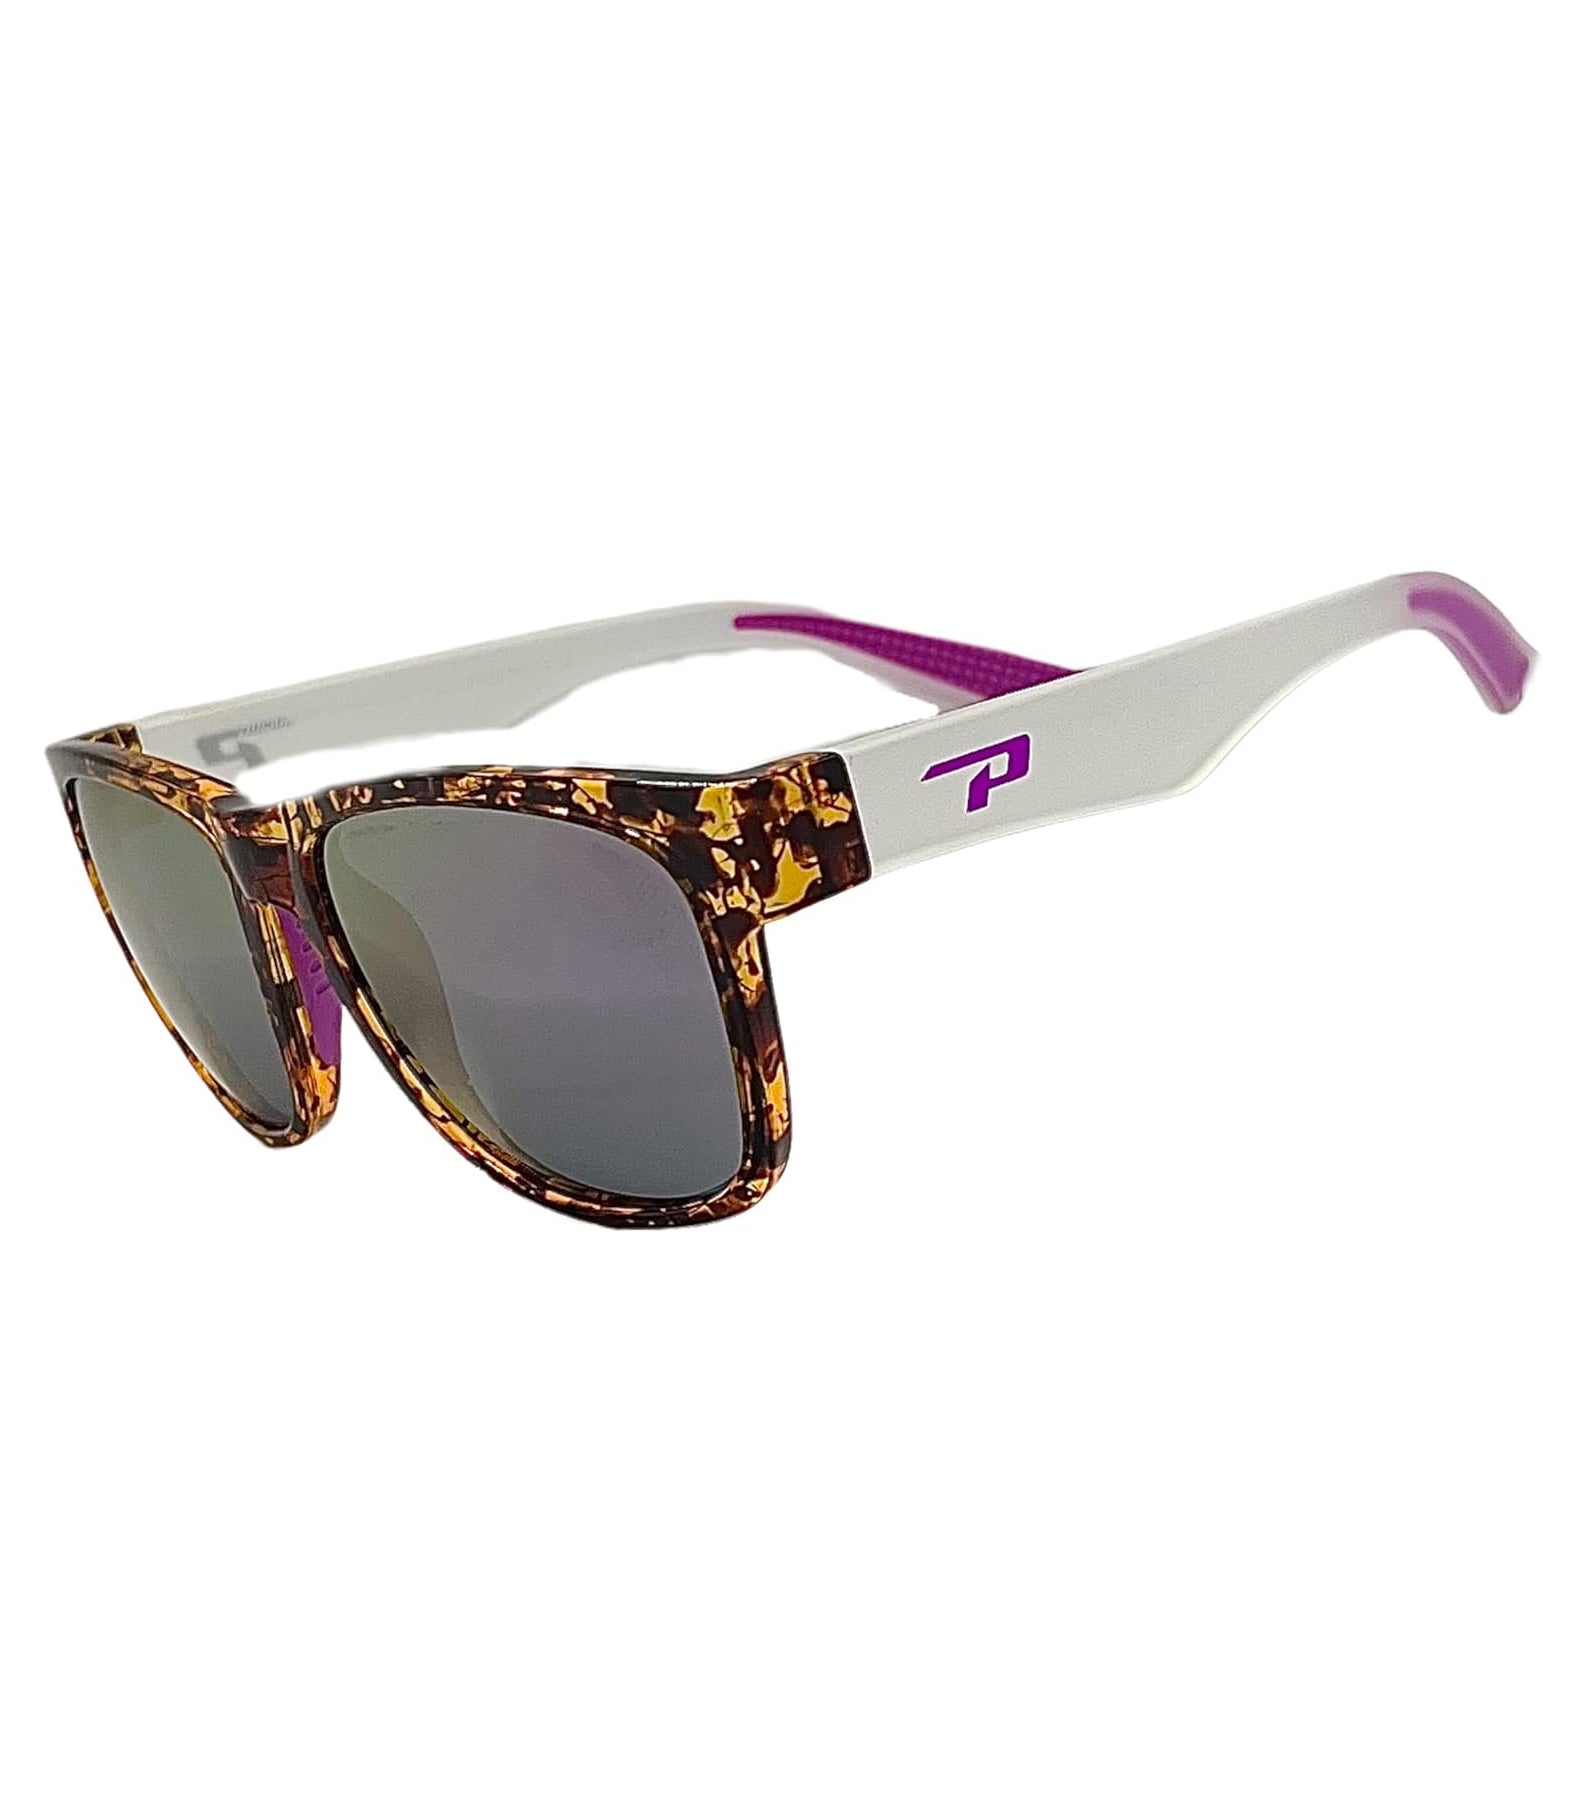 Peppers Ciara Polarized Sunglasses tortclear violet